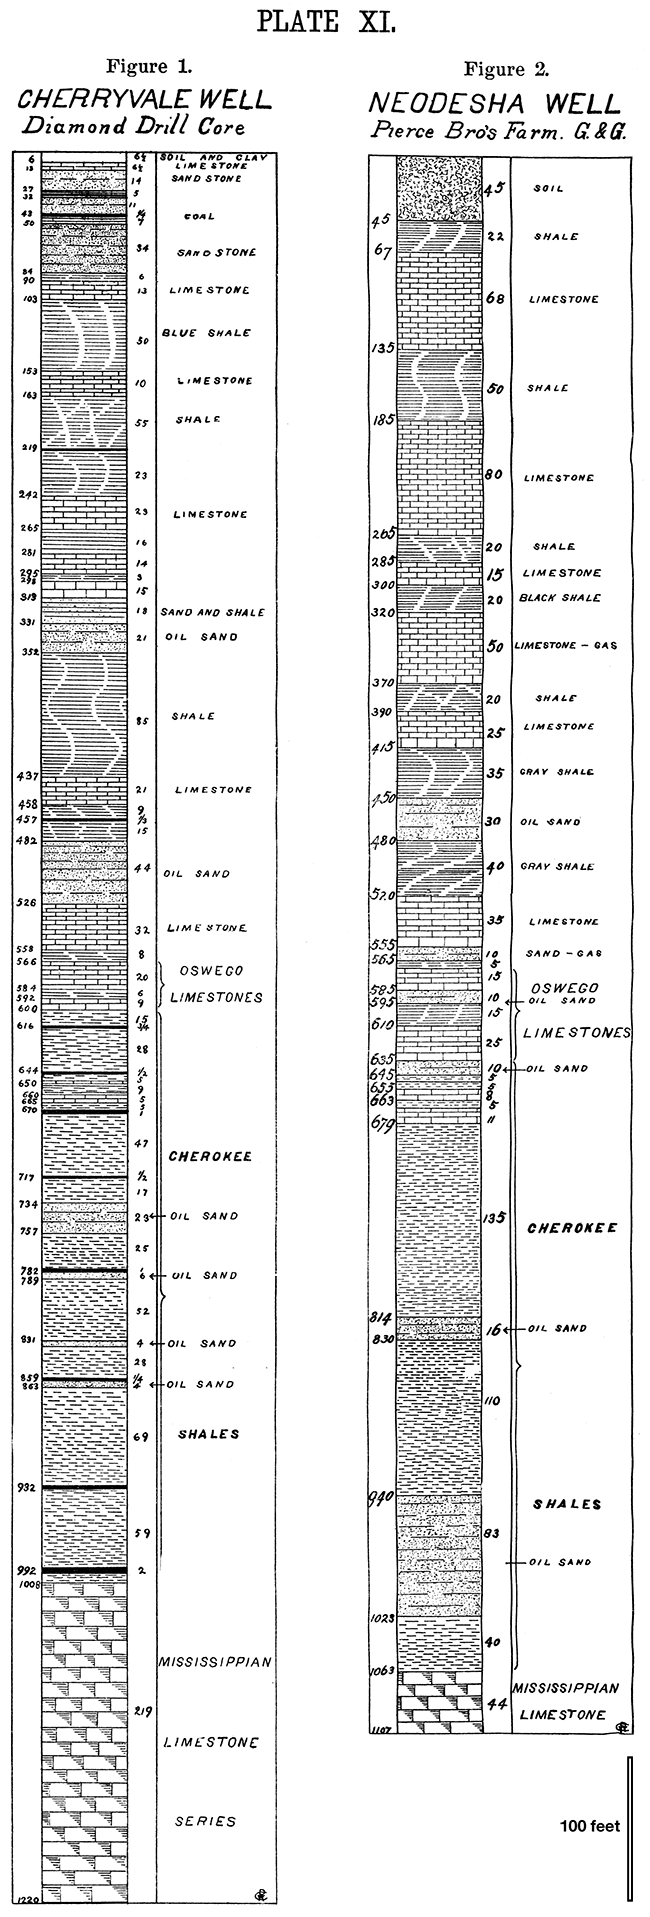 Two stratigraphic columns from the Cherryvale and Neodesha wells.